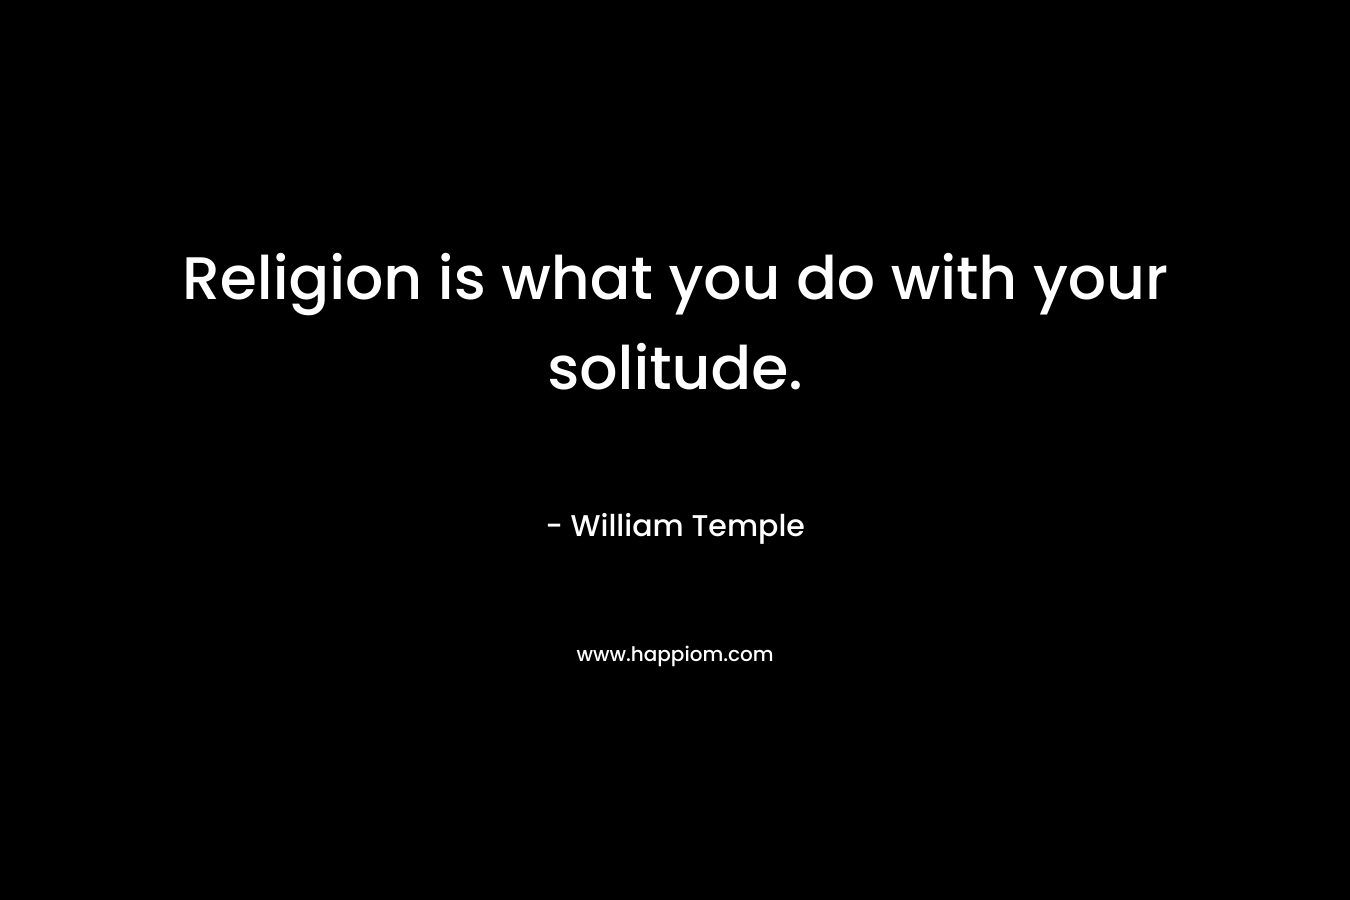 Religion is what you do with your solitude.